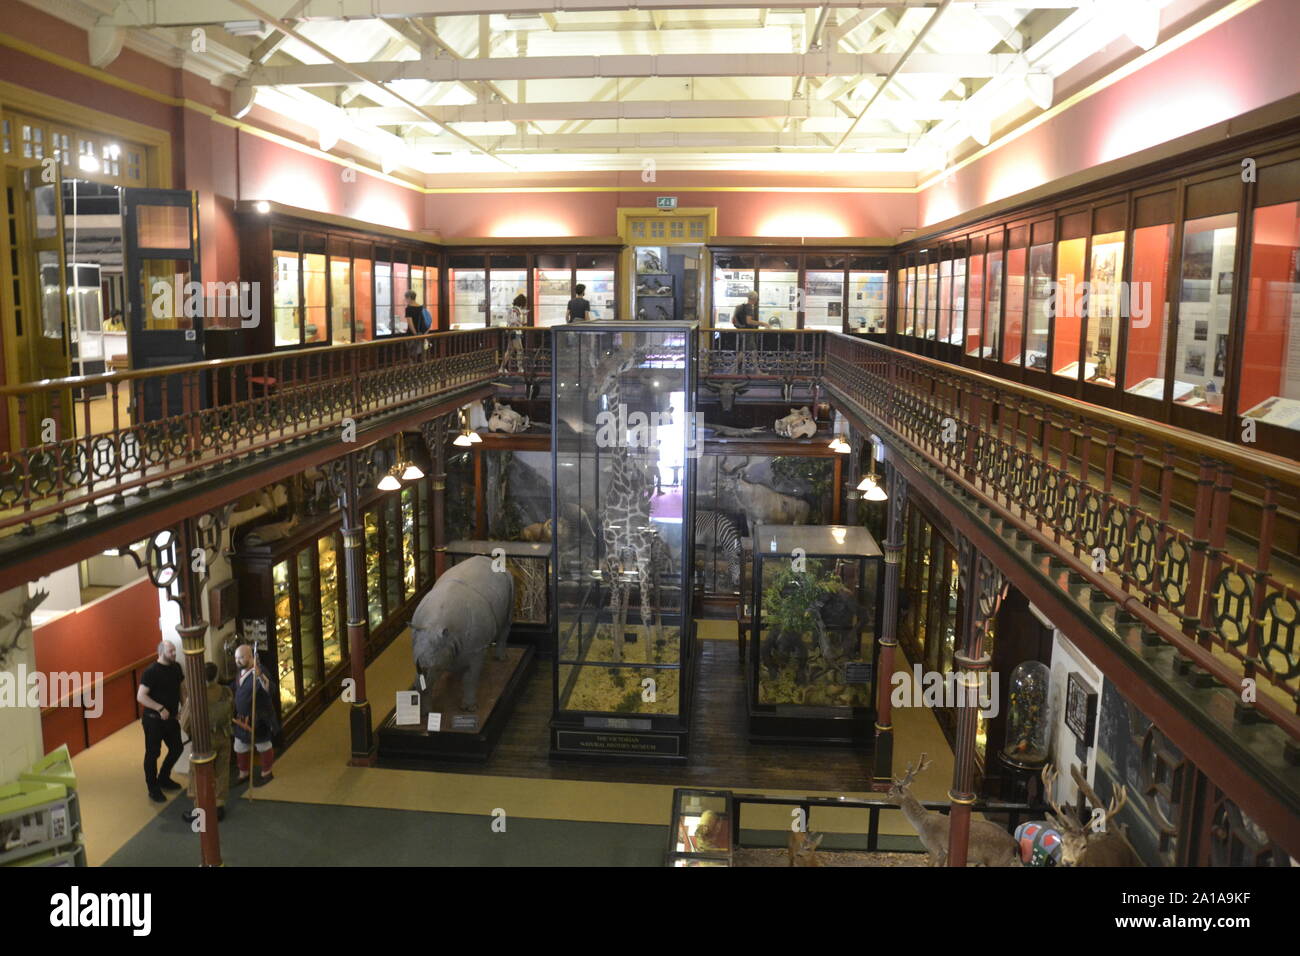 View from the Mezzanine, looking down on the Victorian Natural History Gallery inside Ipswich Museum, Ipswich, Suffolk, UK. Stock Photo